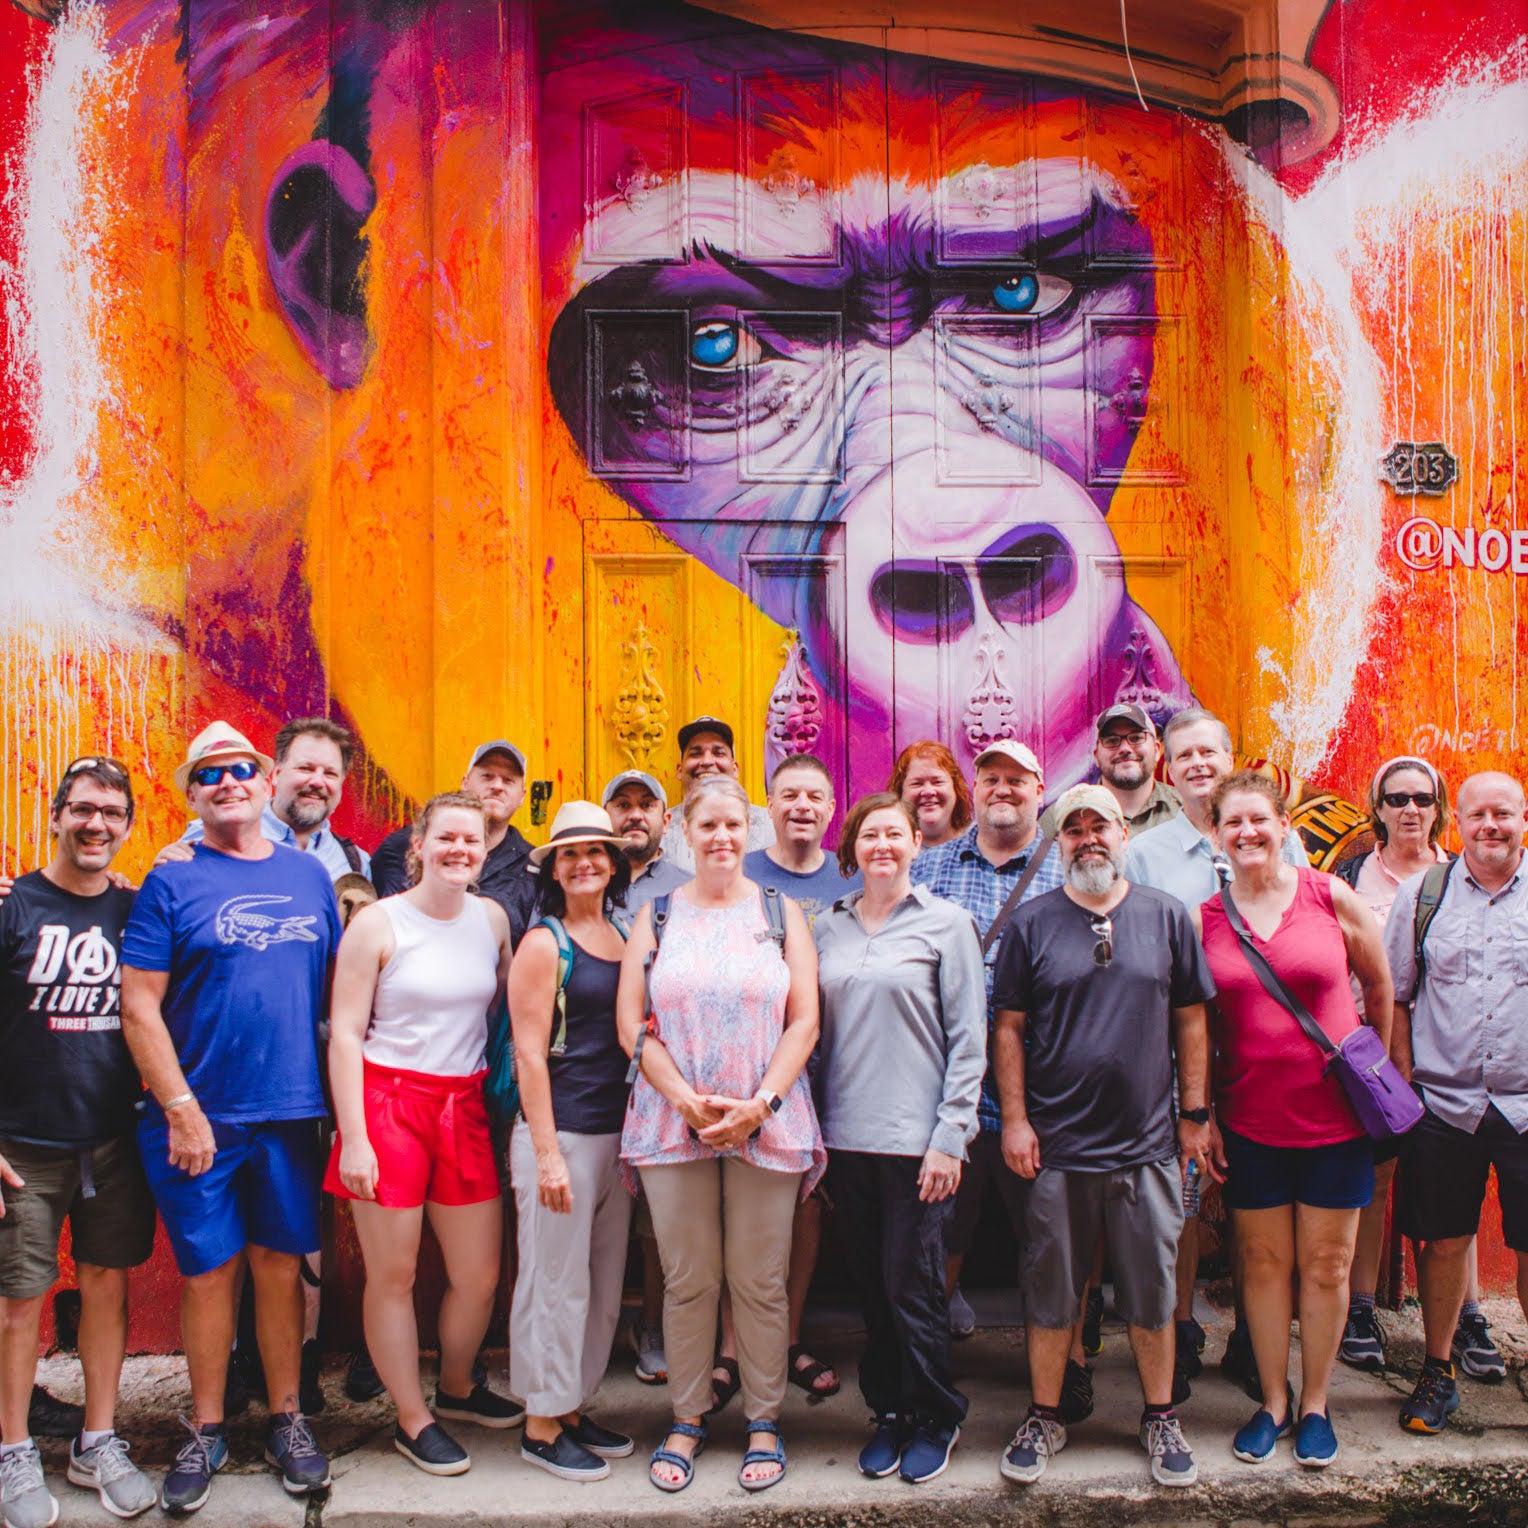 Gardner Tours Custom Cuba Tour Large Group of Professional Tour Guides all together in front of a painted door with a gorilla in Old Havana Cuba